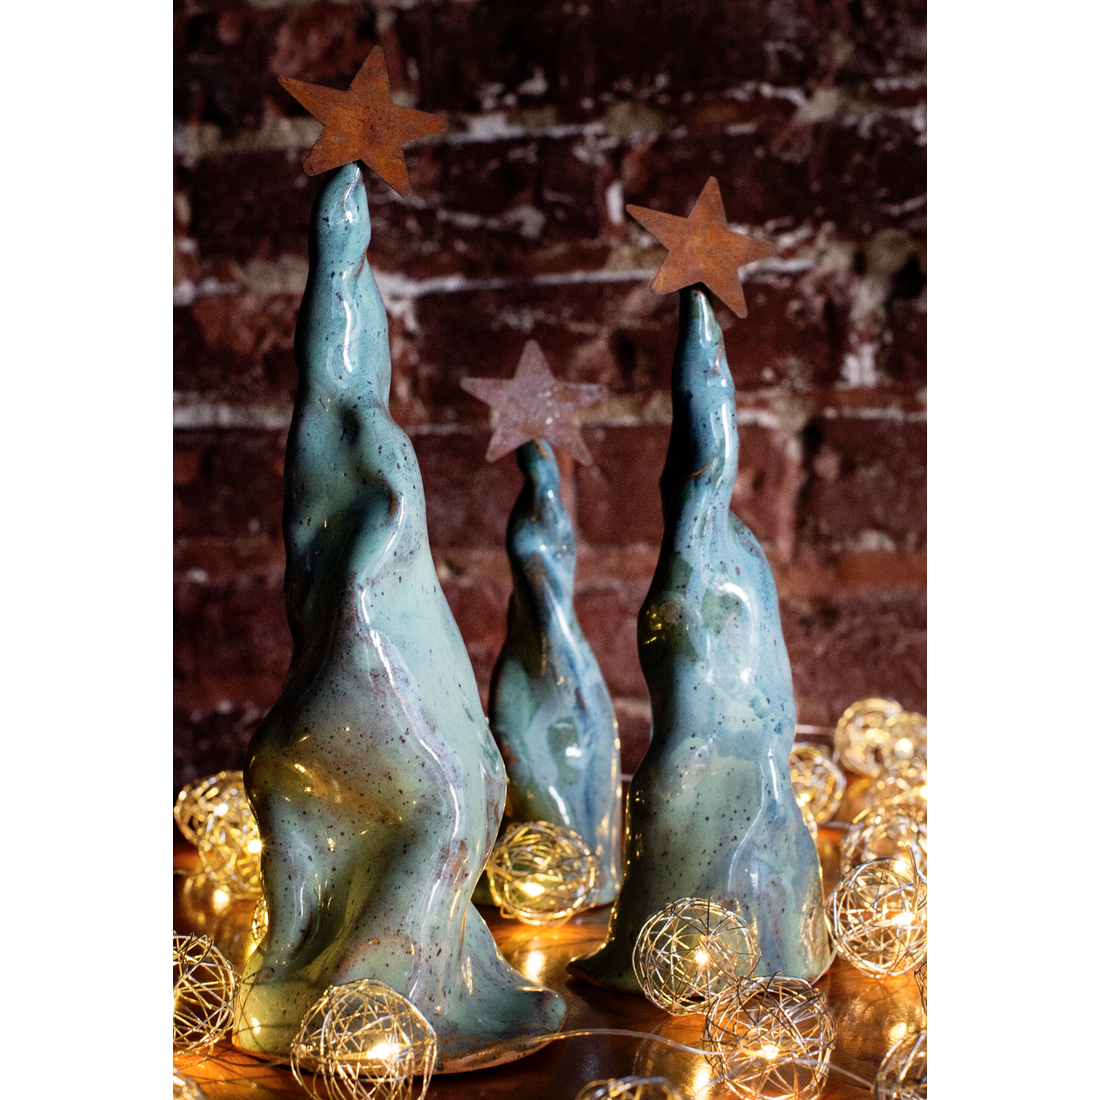 Ceramic Holiday Trees- Assorted Sizes